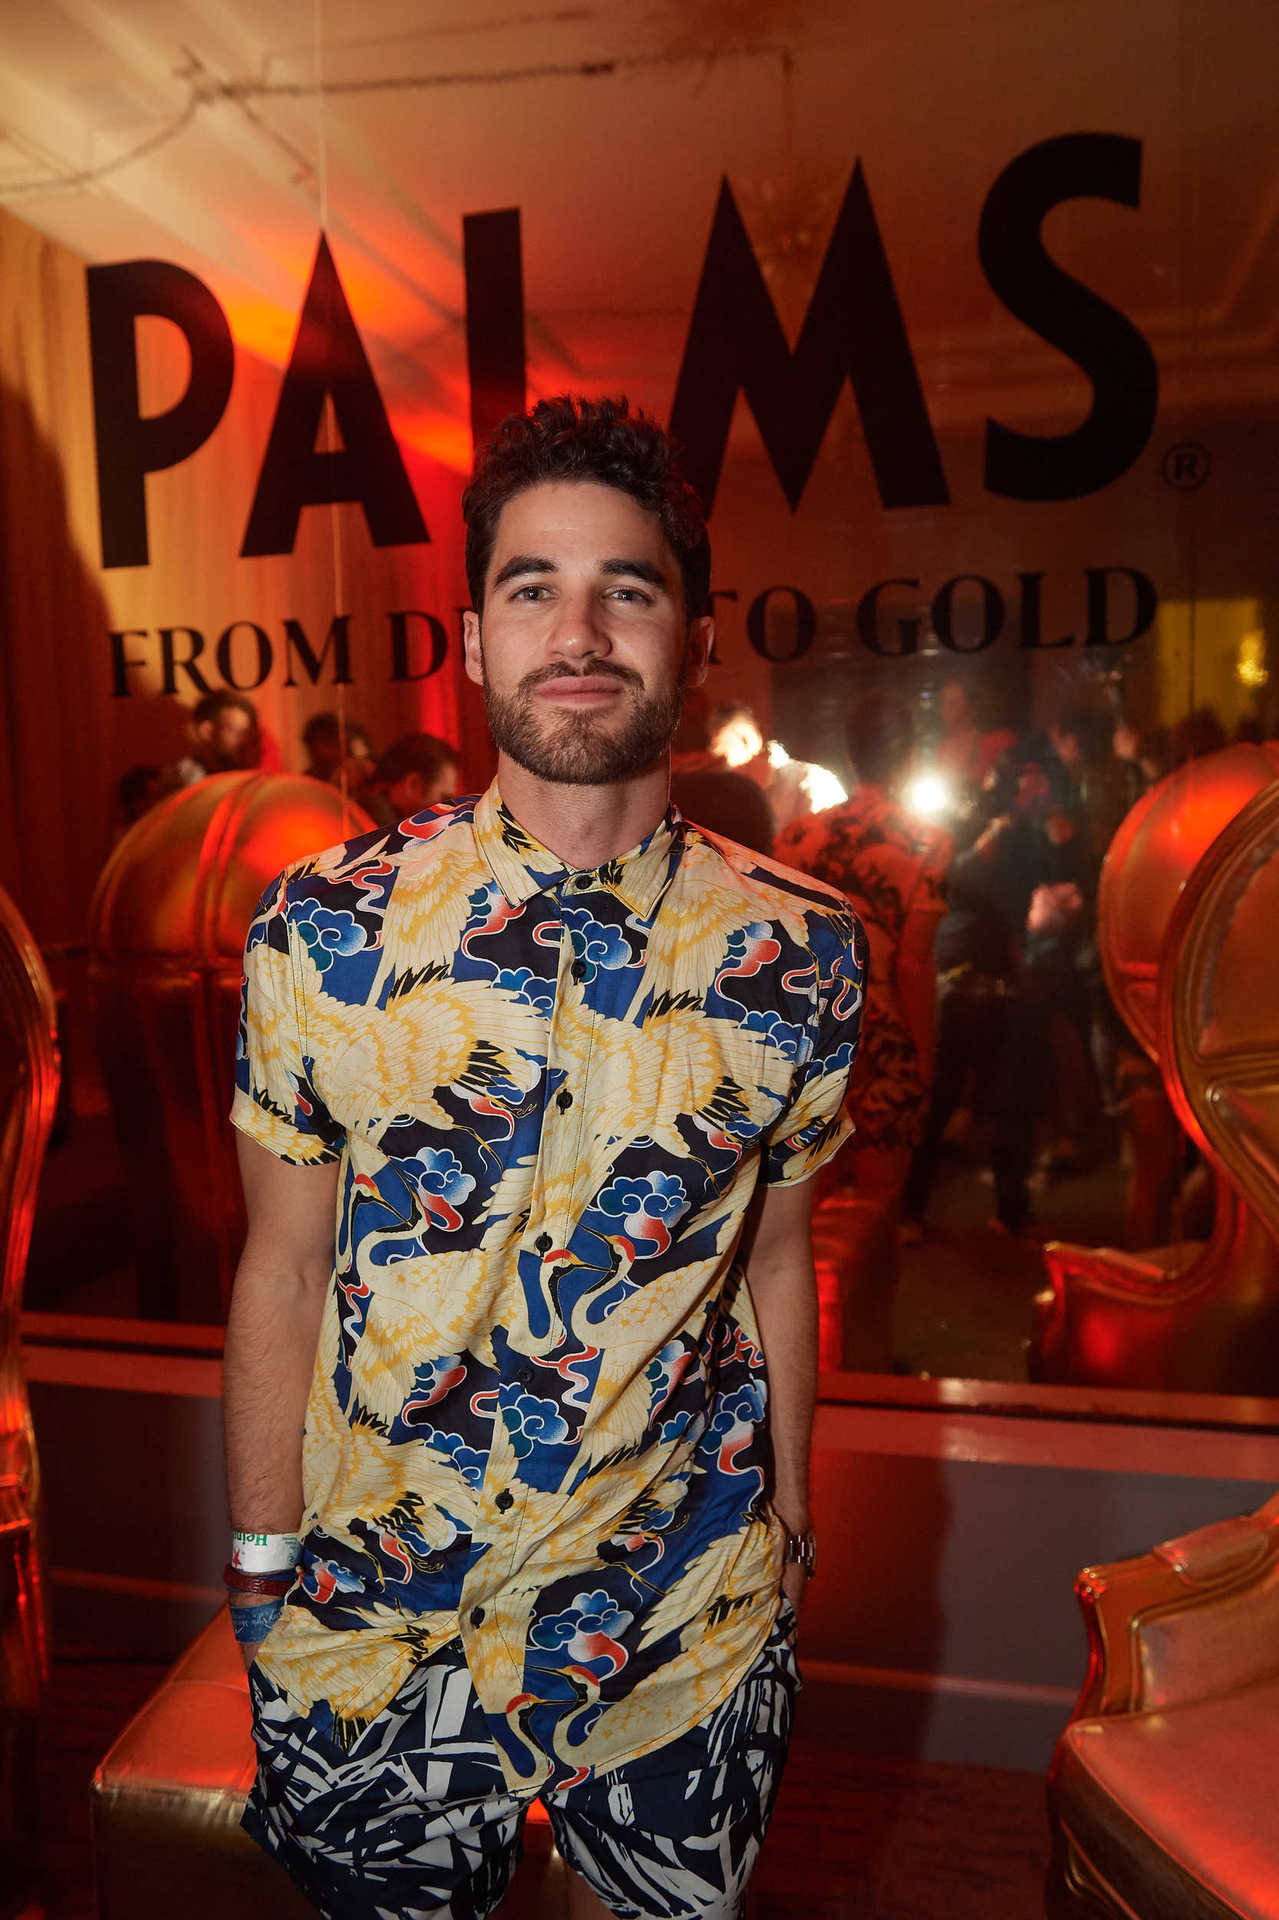 GoldenGlobes - Darren's Miscellaneous Projects and Events for 2018 - Page 3 Tumblr_p79guzdikY1wpi2k2o1_1280